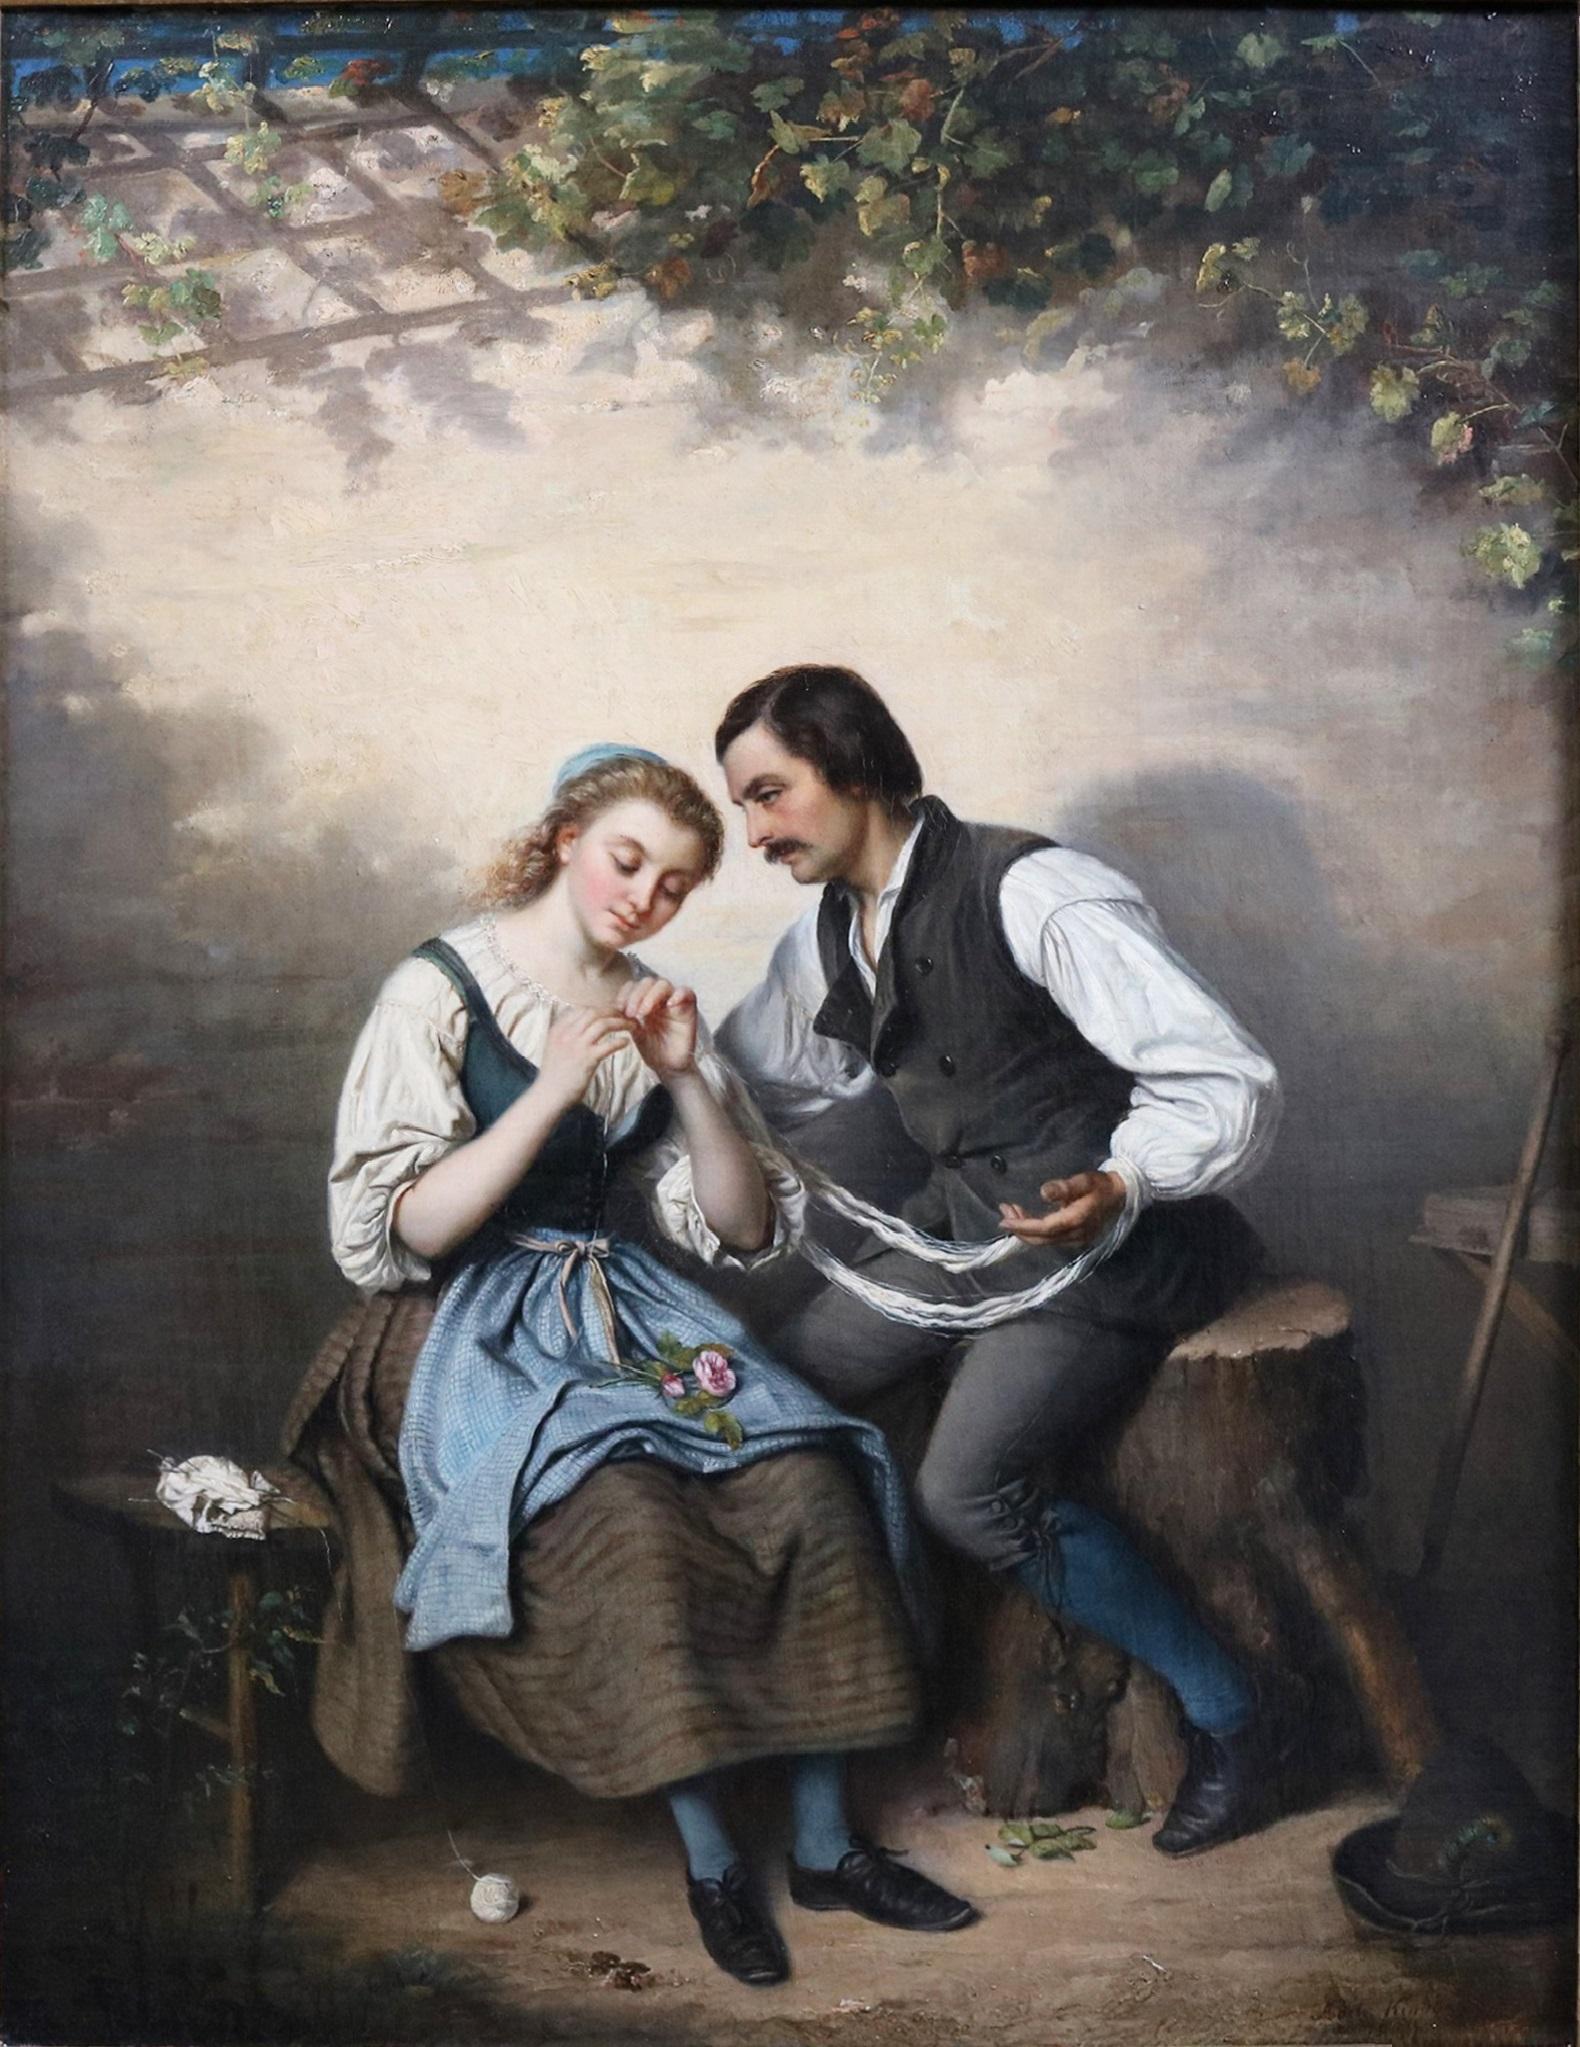 ‘Une Affection Tacite’ by Adèle Kindt (1804-1893). 

The painting – which depicts a young woman and her ardent admirer – is signed by the artist and dated 1862.

Born into a family of artists, Marie-Adélaïde Kindt was a pupil of the great French